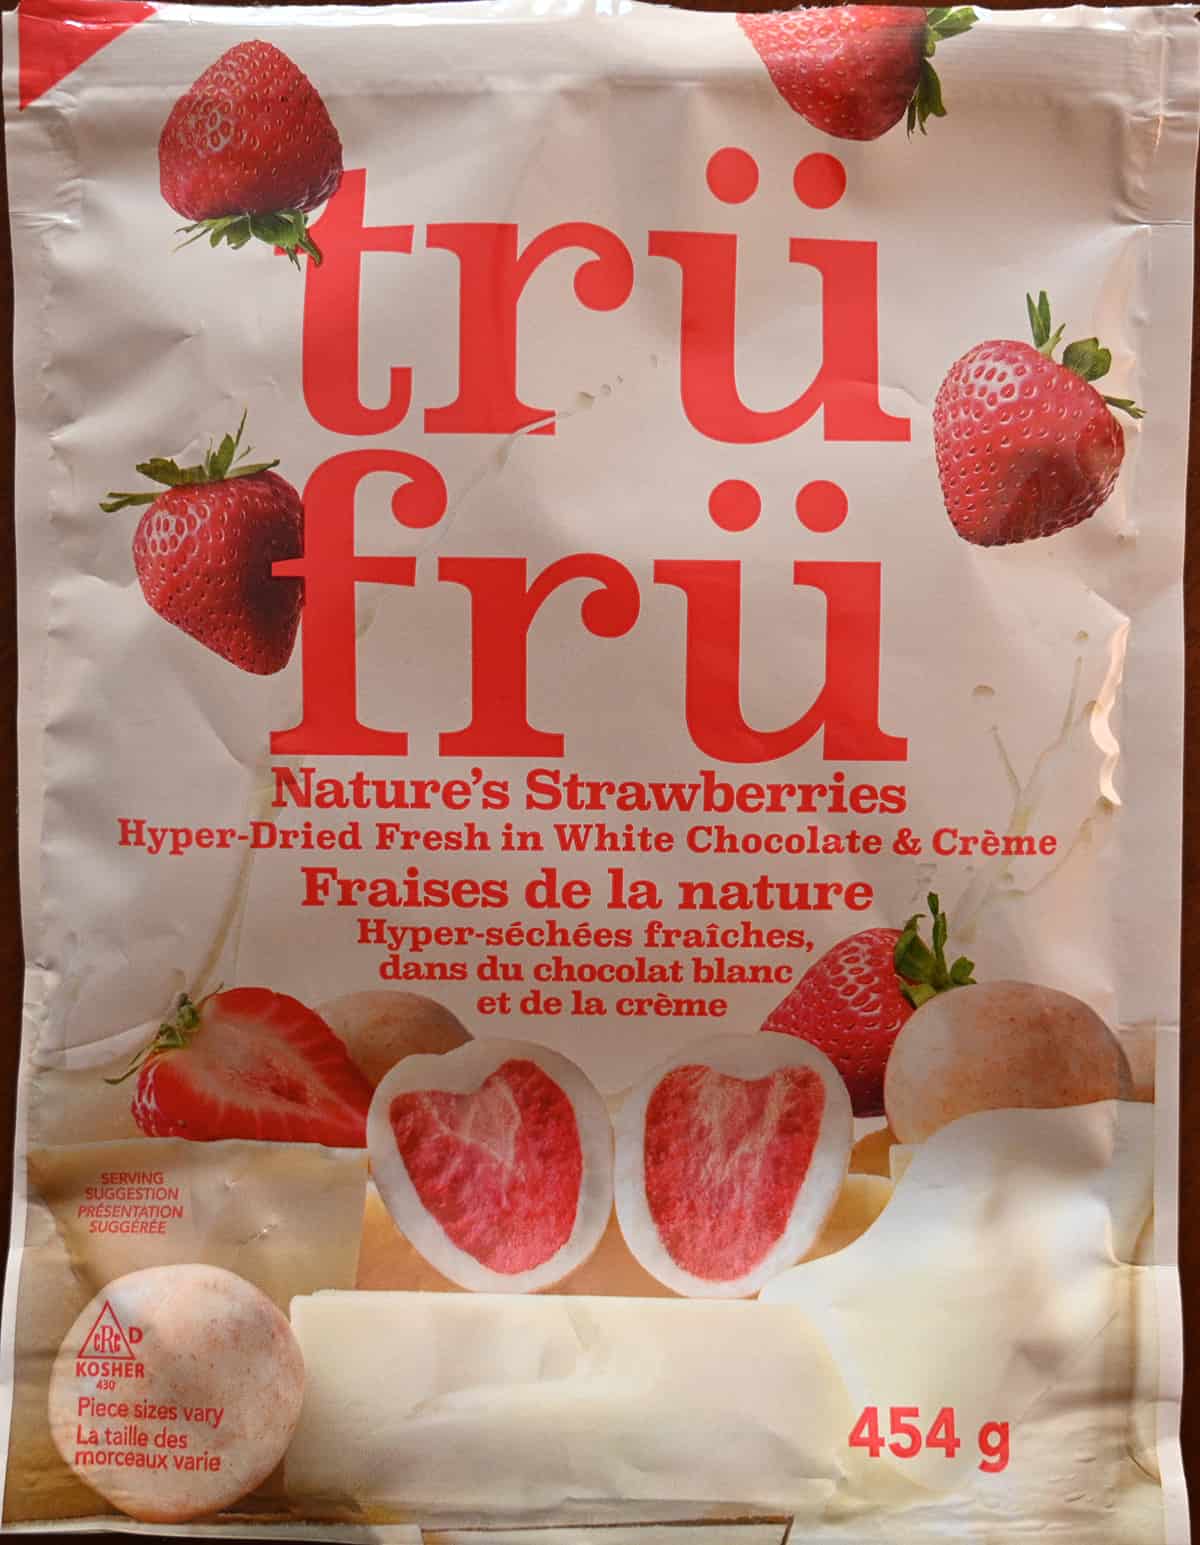 Closeup image of the front of the bag of the Costco Tru Fru White Chocolate & Cream Nature's Strawberries.